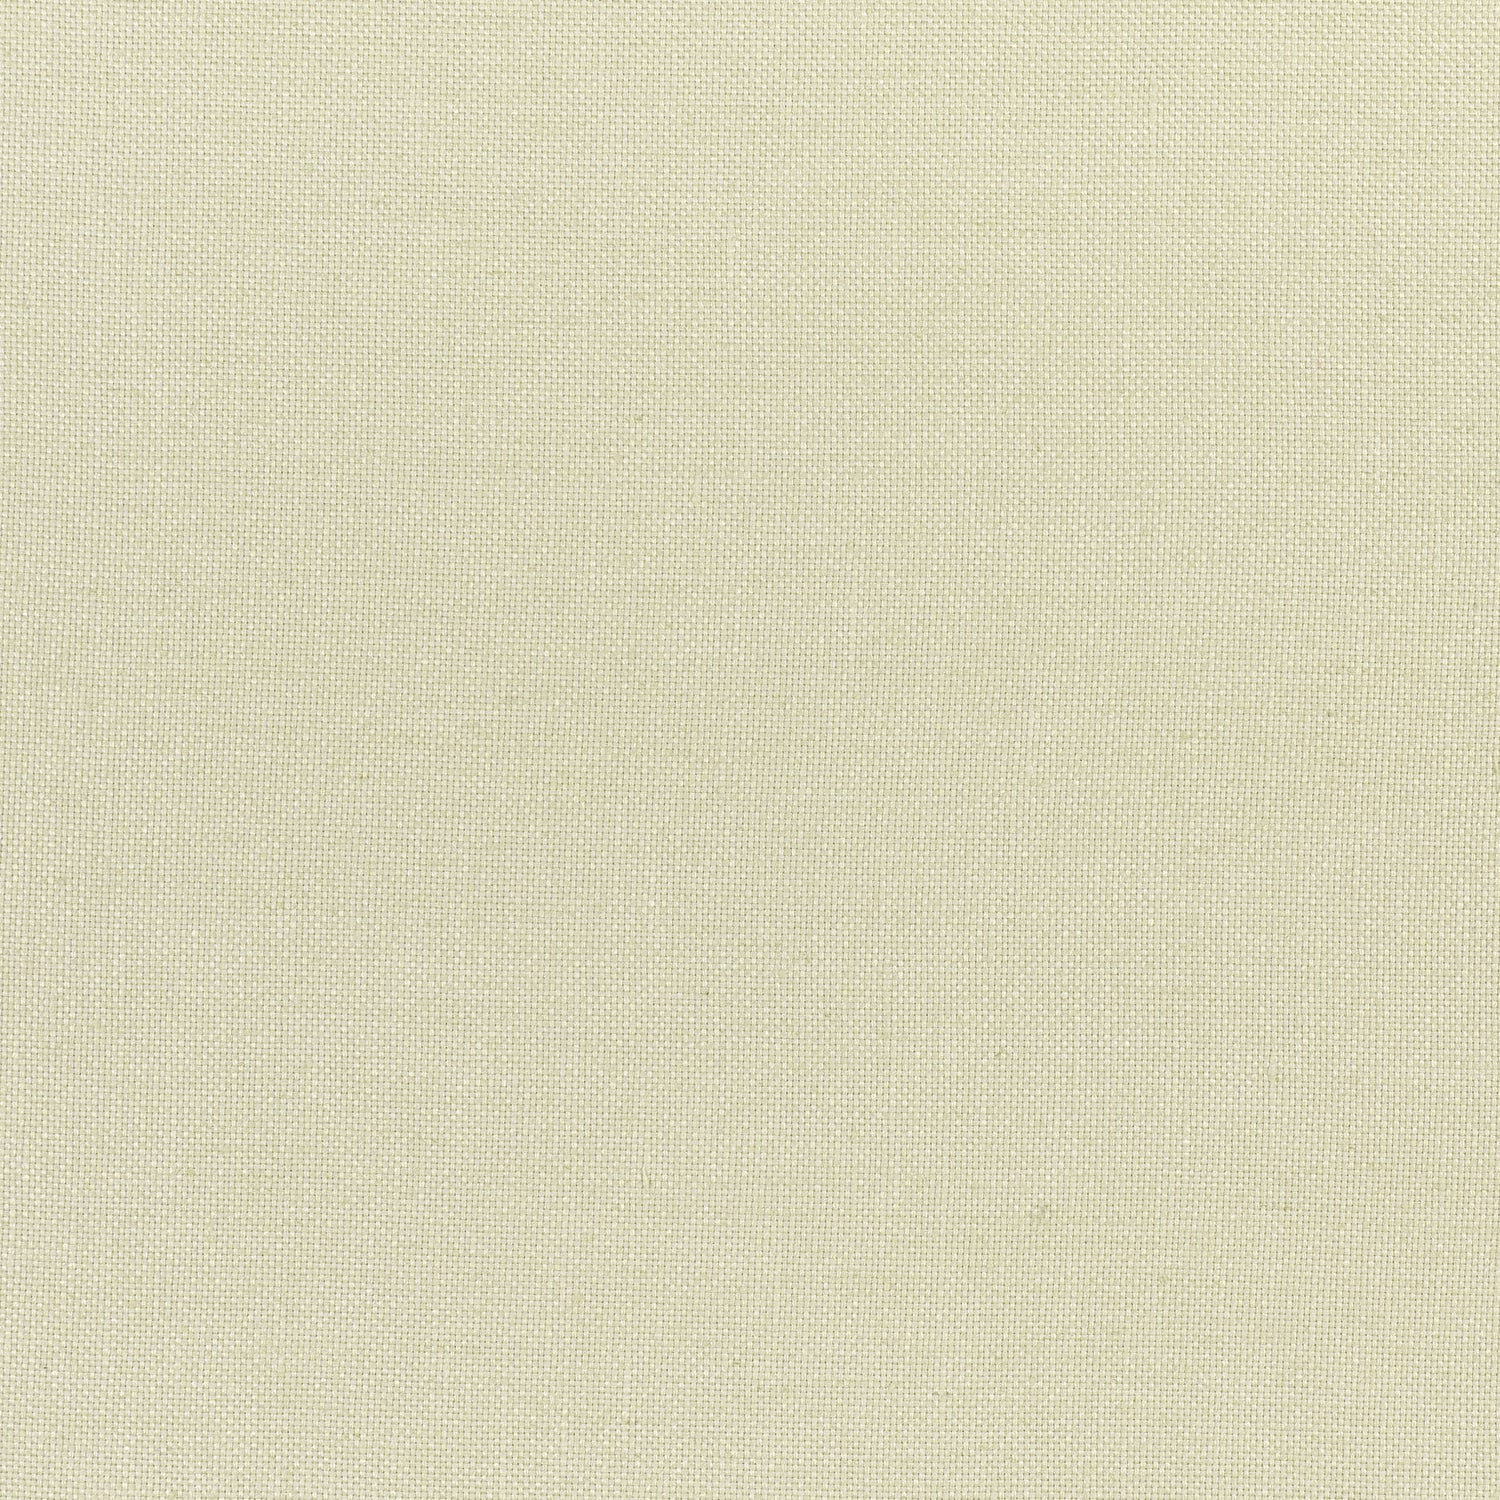 Dawn Linen fabric in green tea color - pattern number FWW7673 - by Thibaut in the Palisades collection